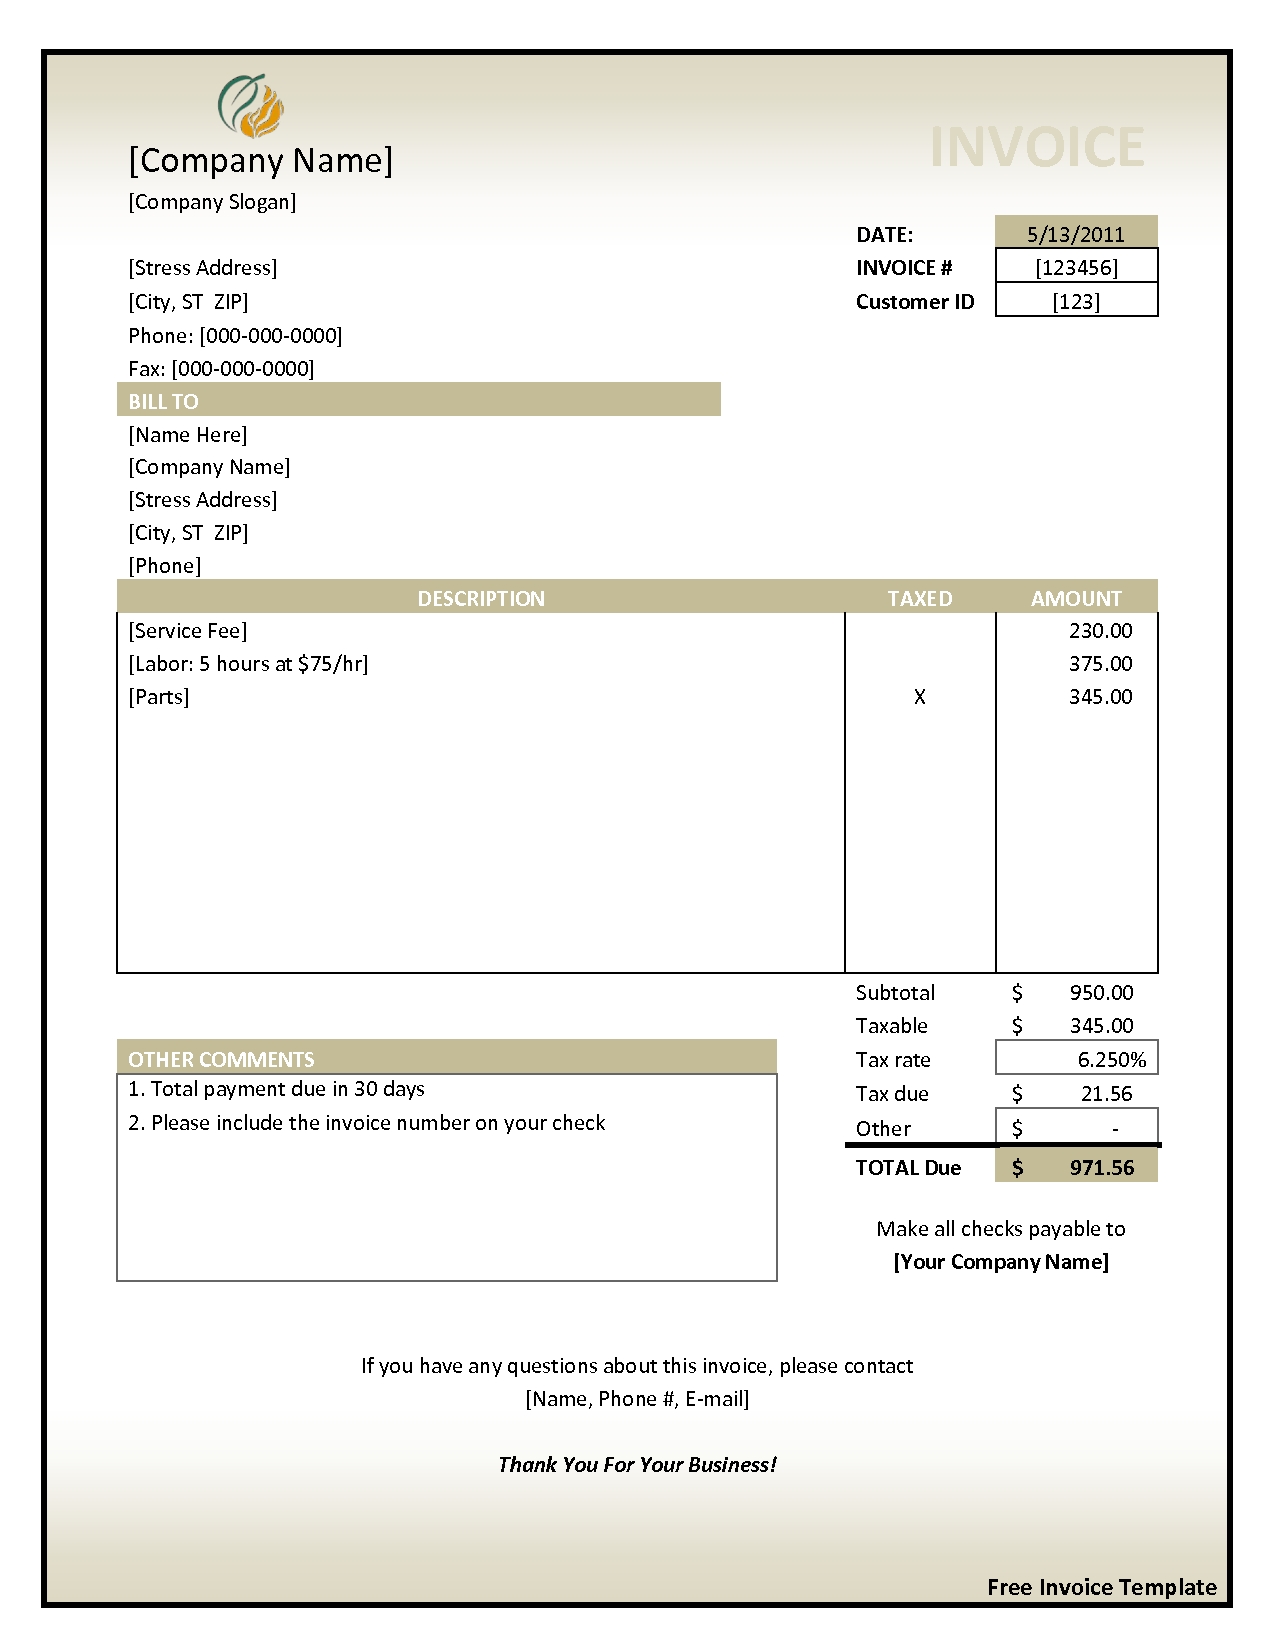 free invoice download download free invoice template free business template 1275 X 1650